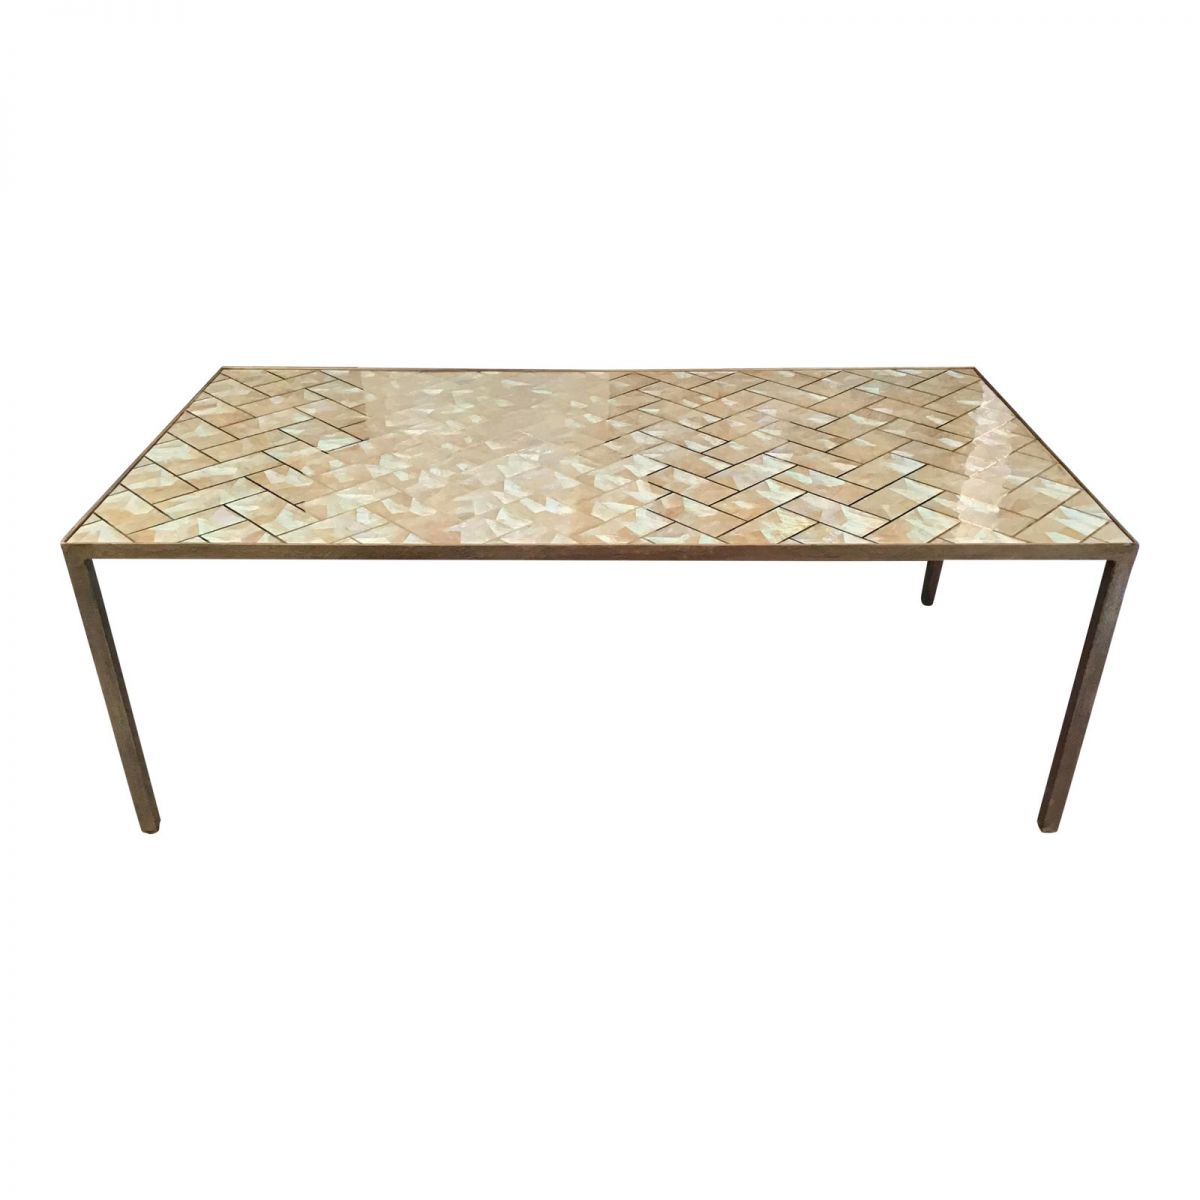 mother of pearl table